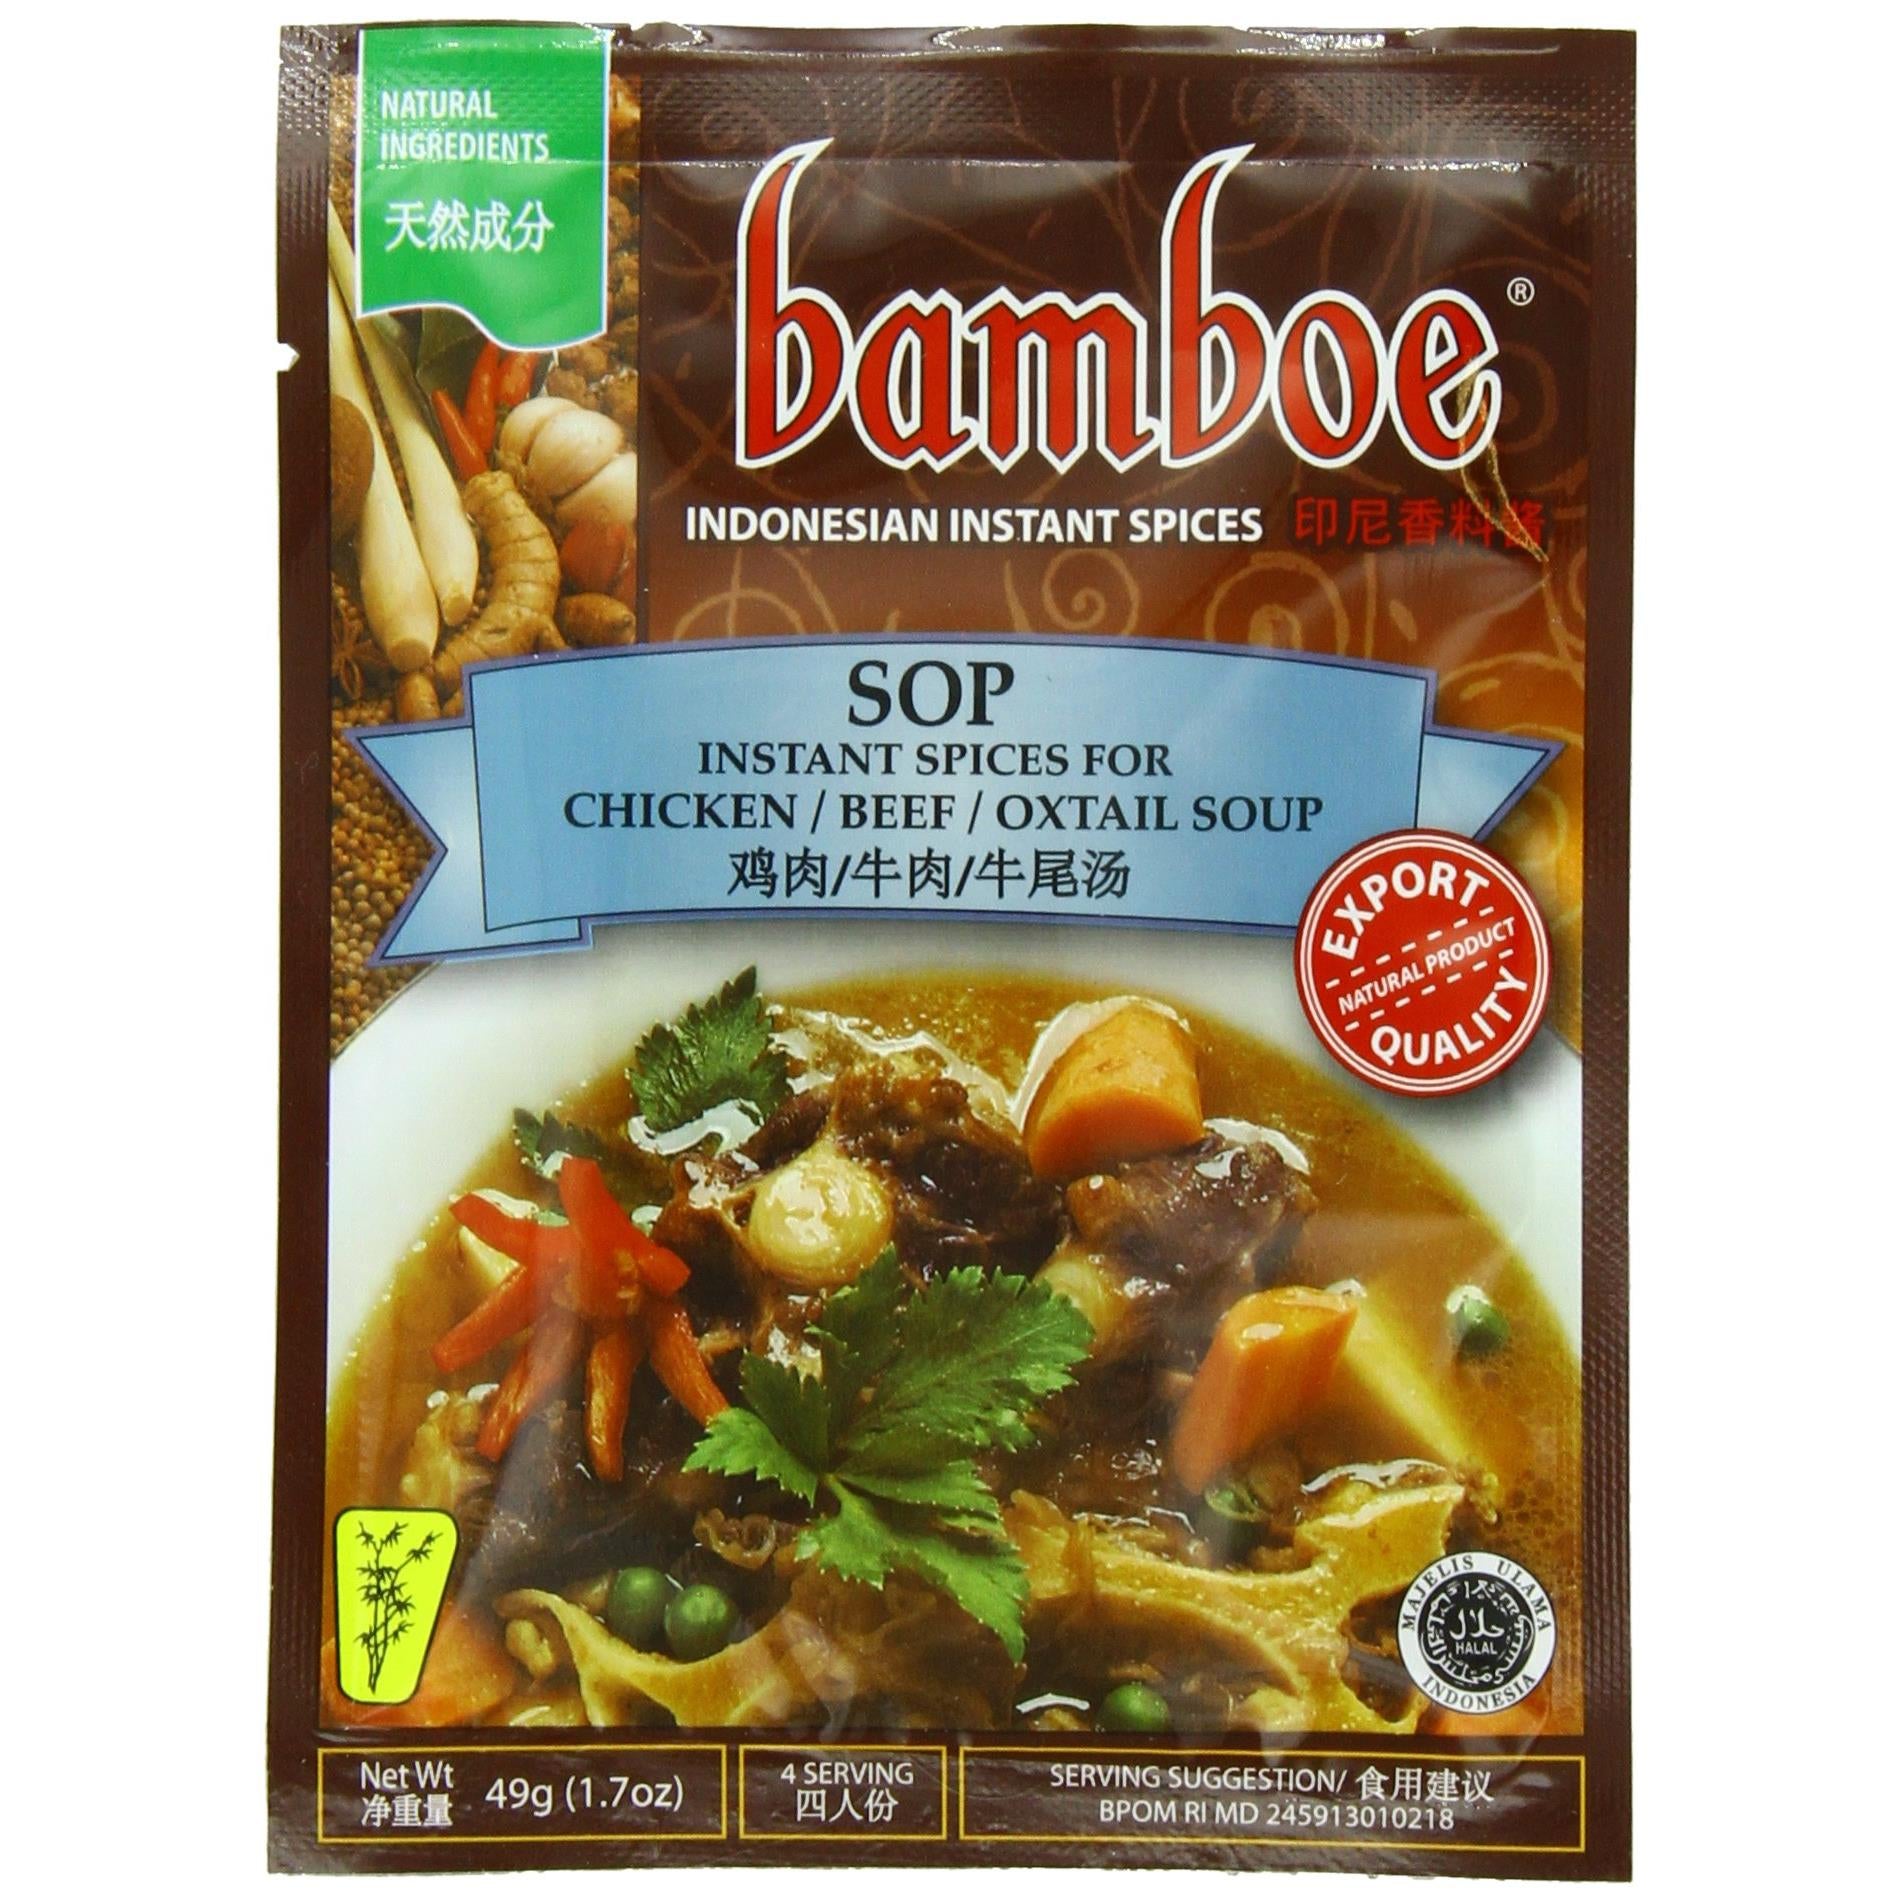 Bamboe Sop Chicken, Beef and Oxtail Soup, 1.7-Ounce (Pack of 12)